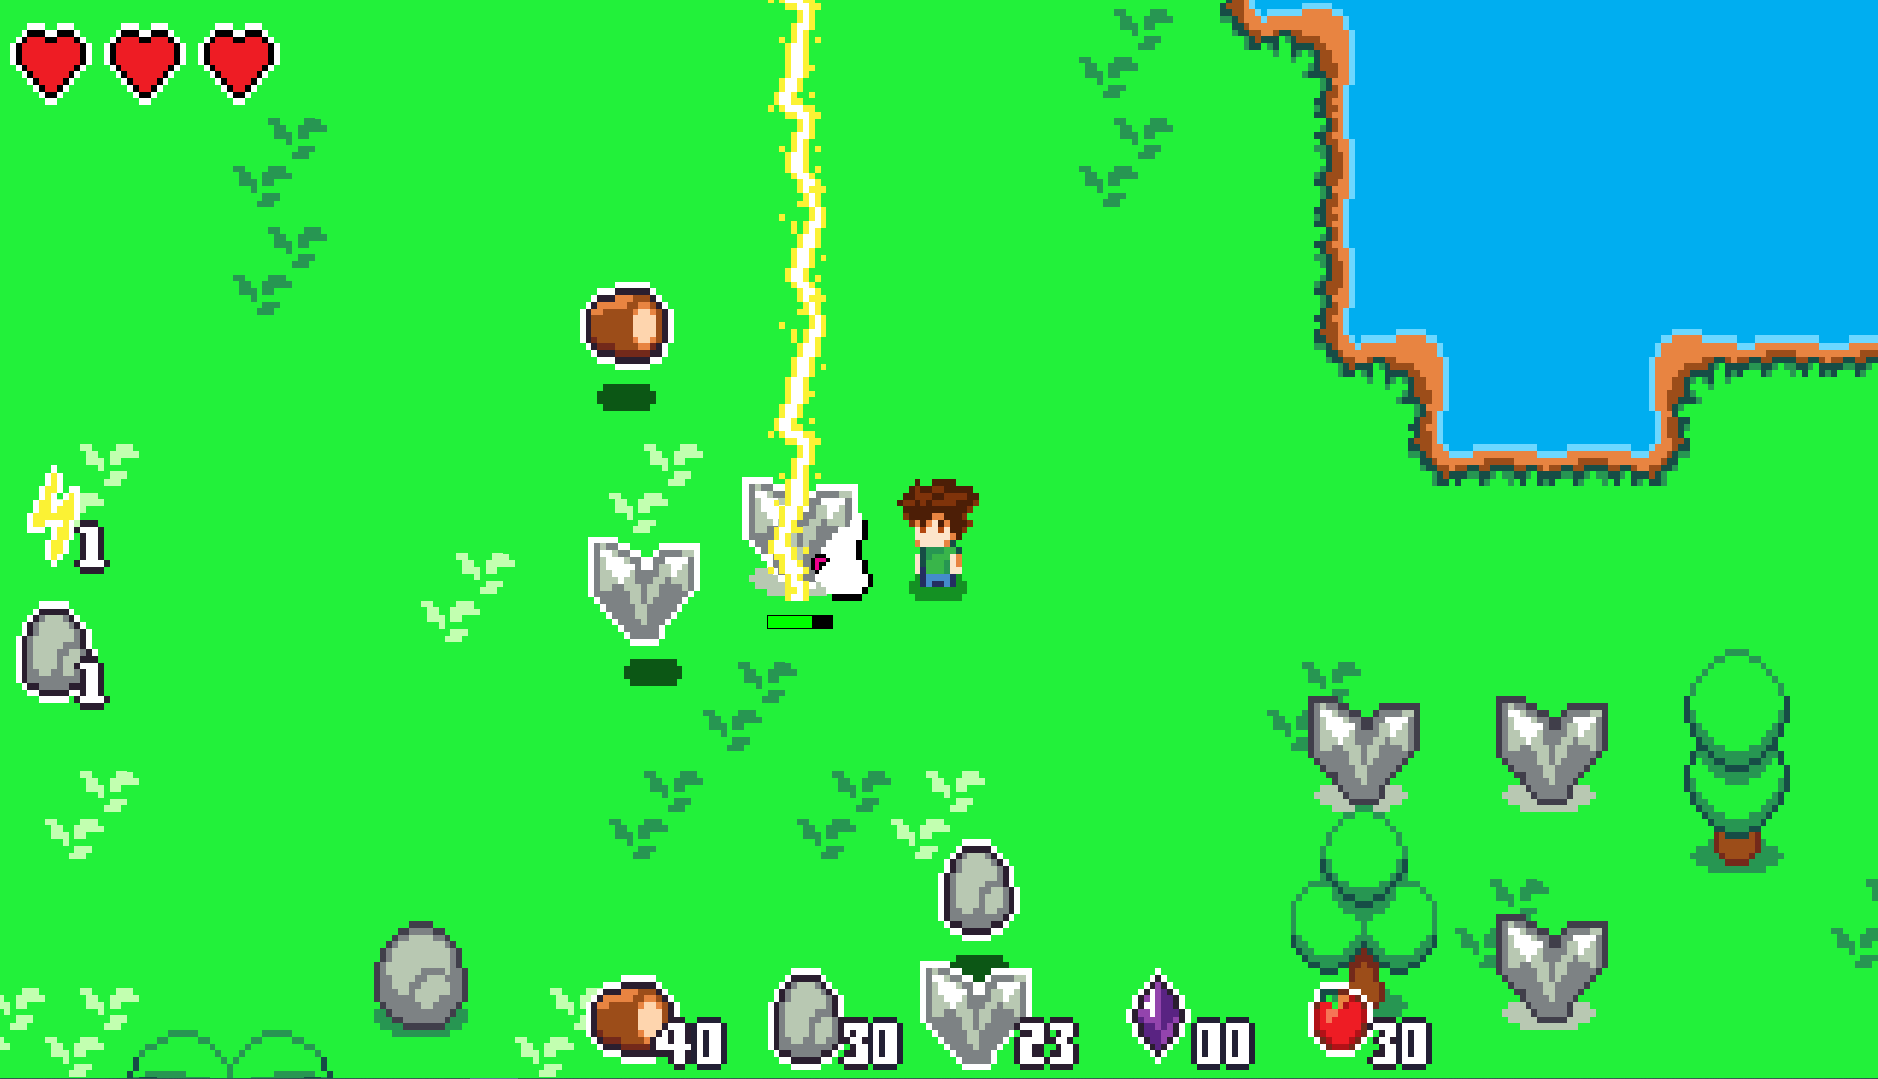 Here you can see the lightning spell, it arcs to nearby resources.